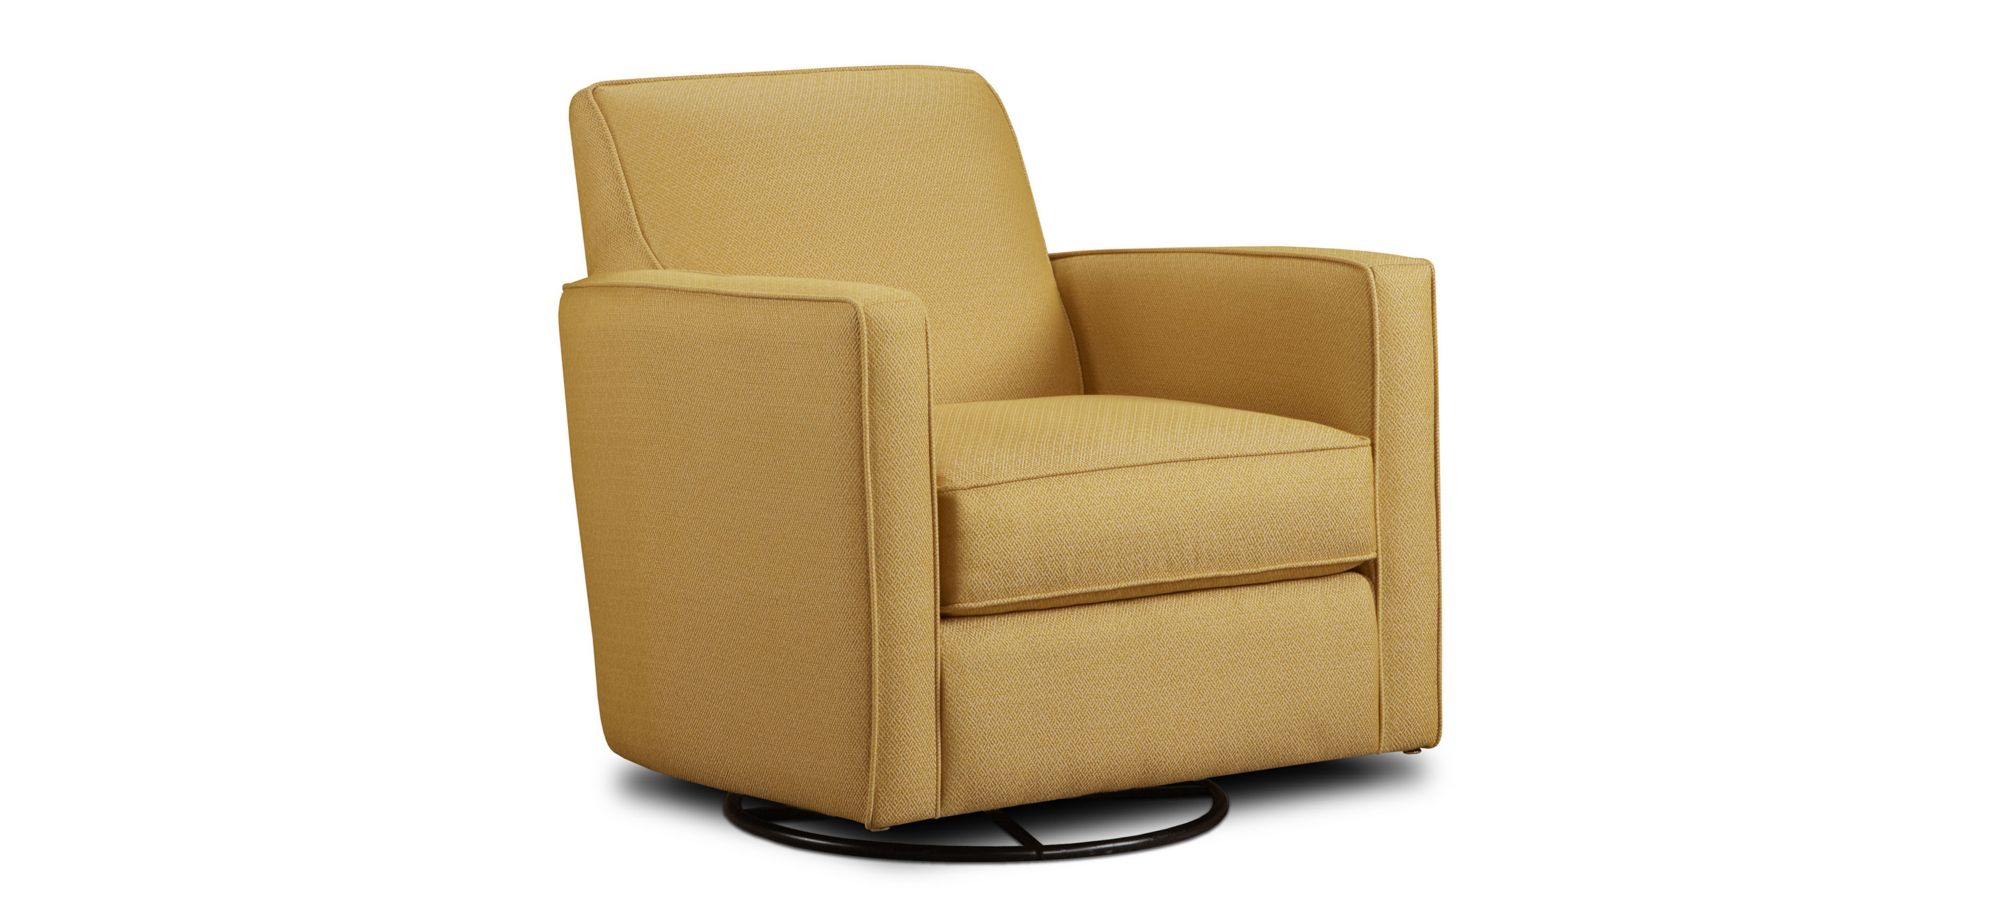 Willoughby Swivel Glider in Gold Mine Citrine by Fusion Furniture